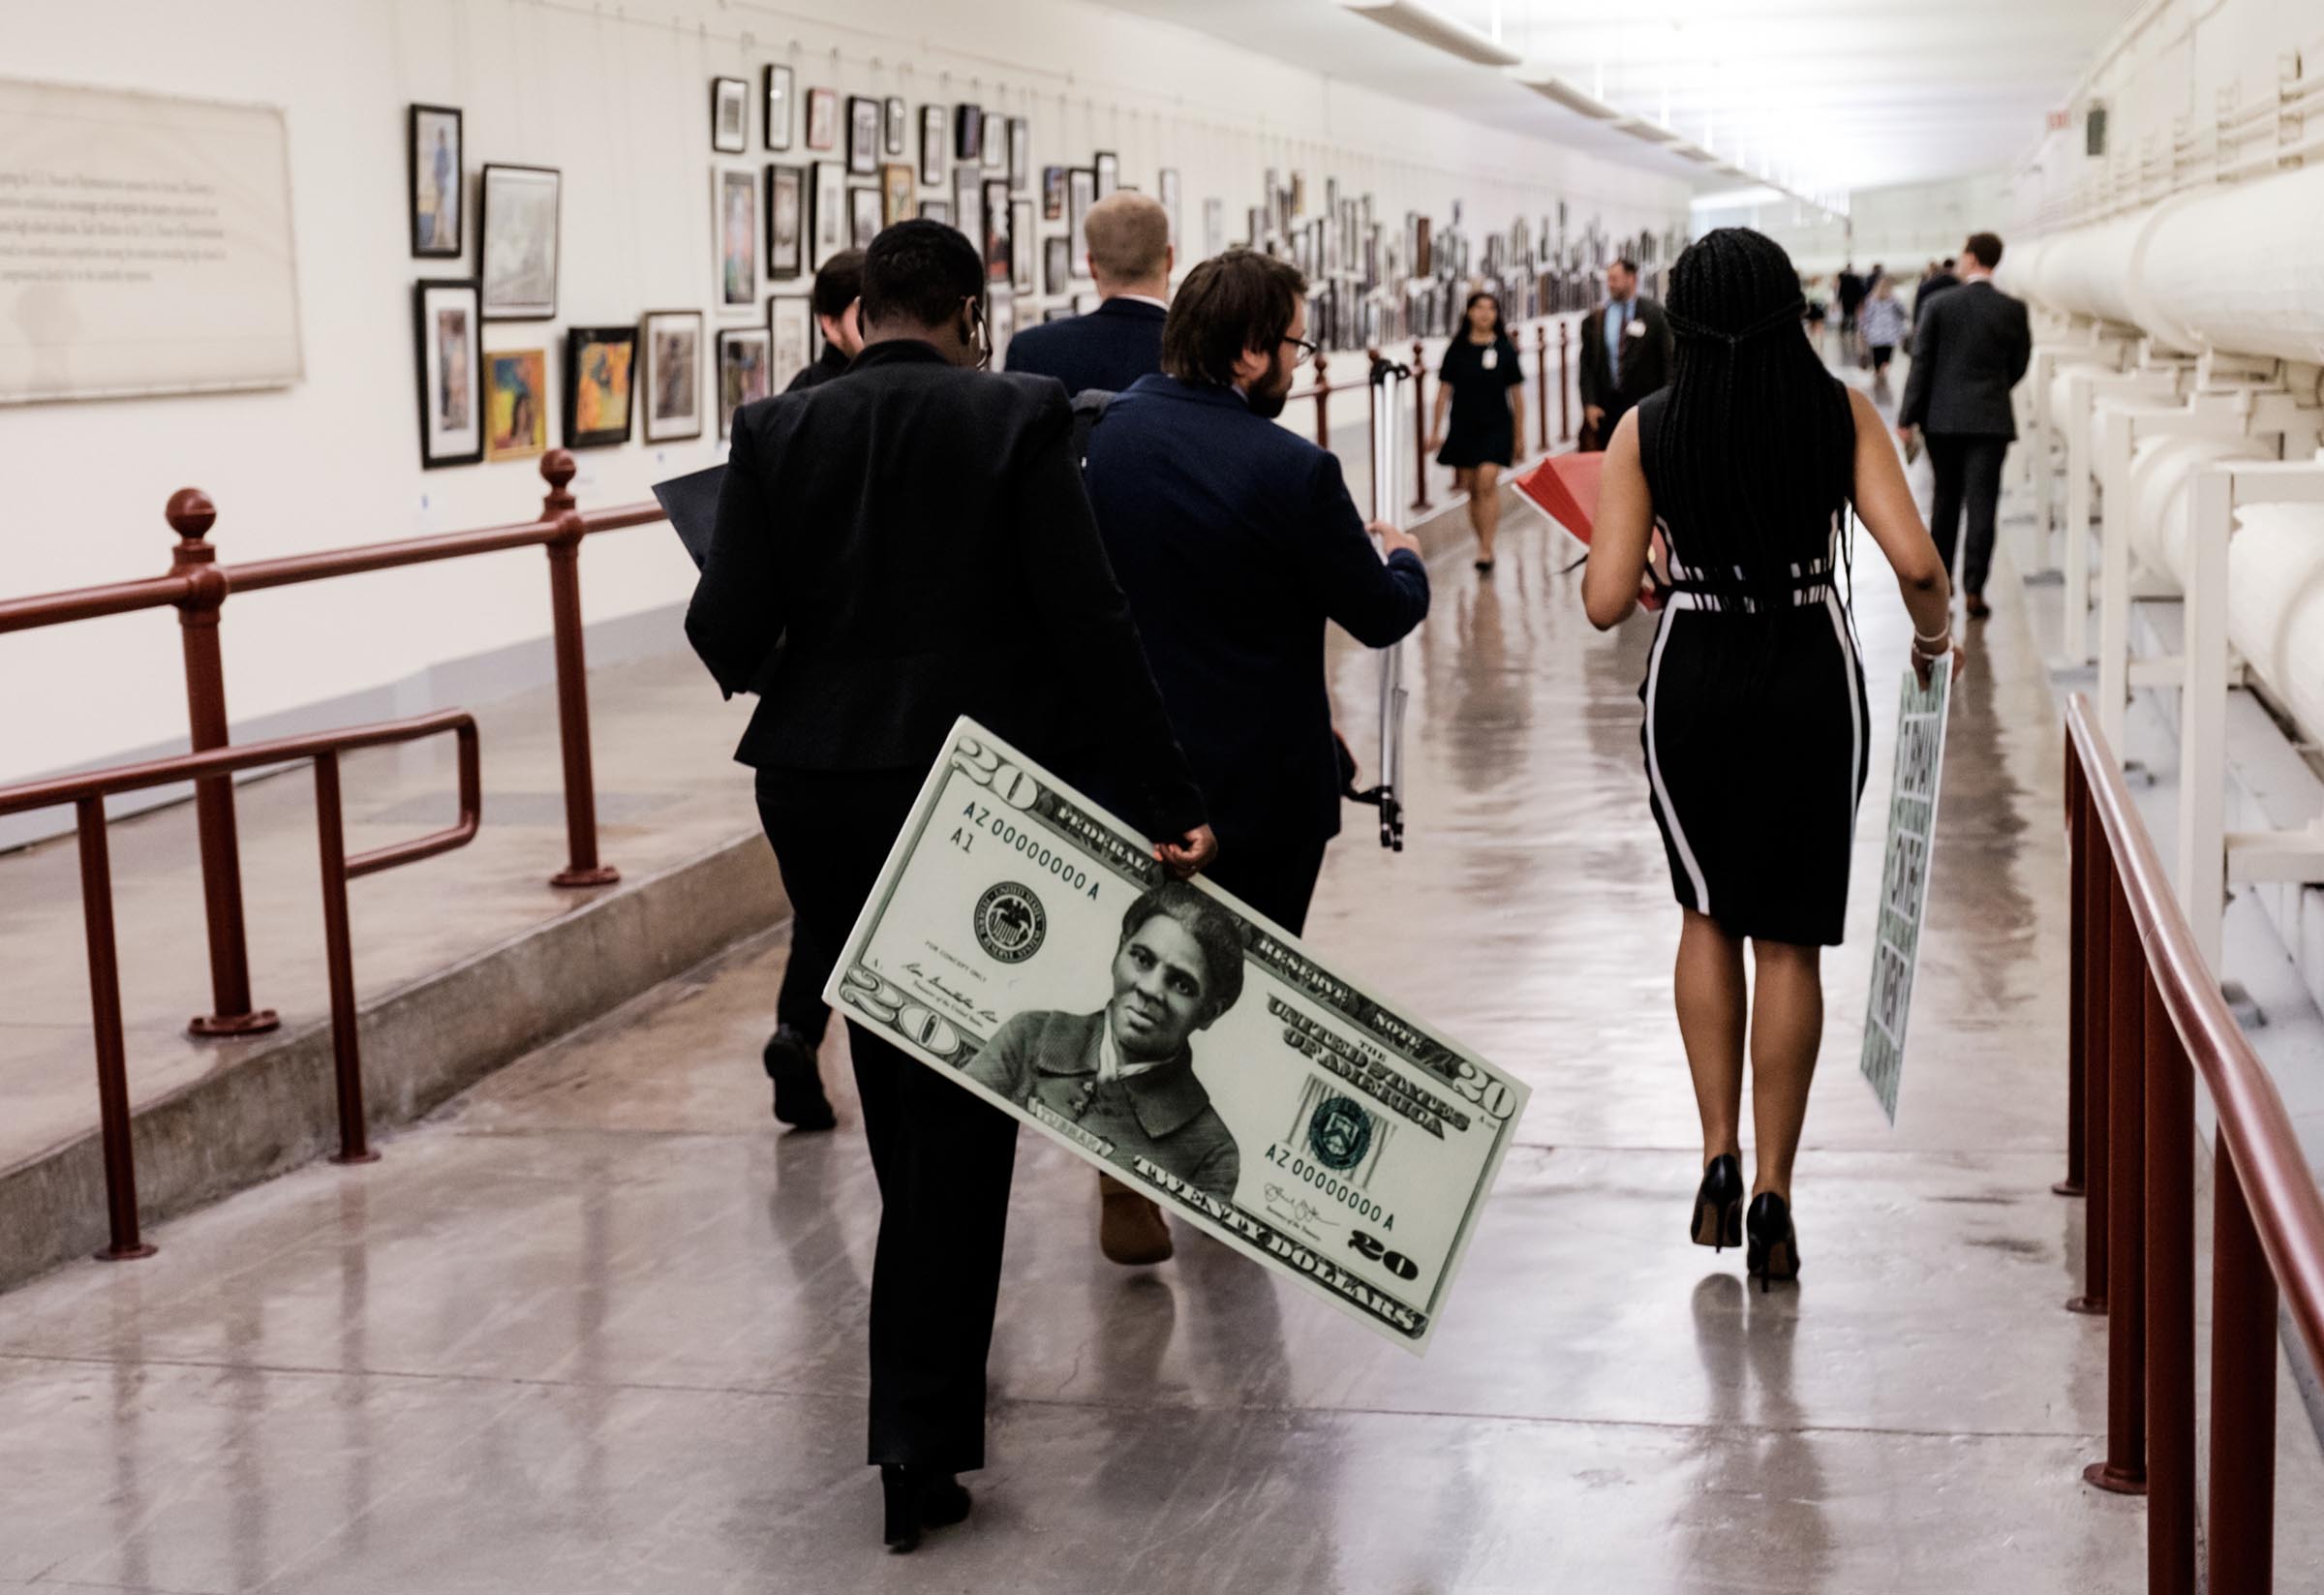 A congressional staffer departs holding a visual aide following a news conference regarding the redesigned $20 bill meant to honor Harriet Tubman.